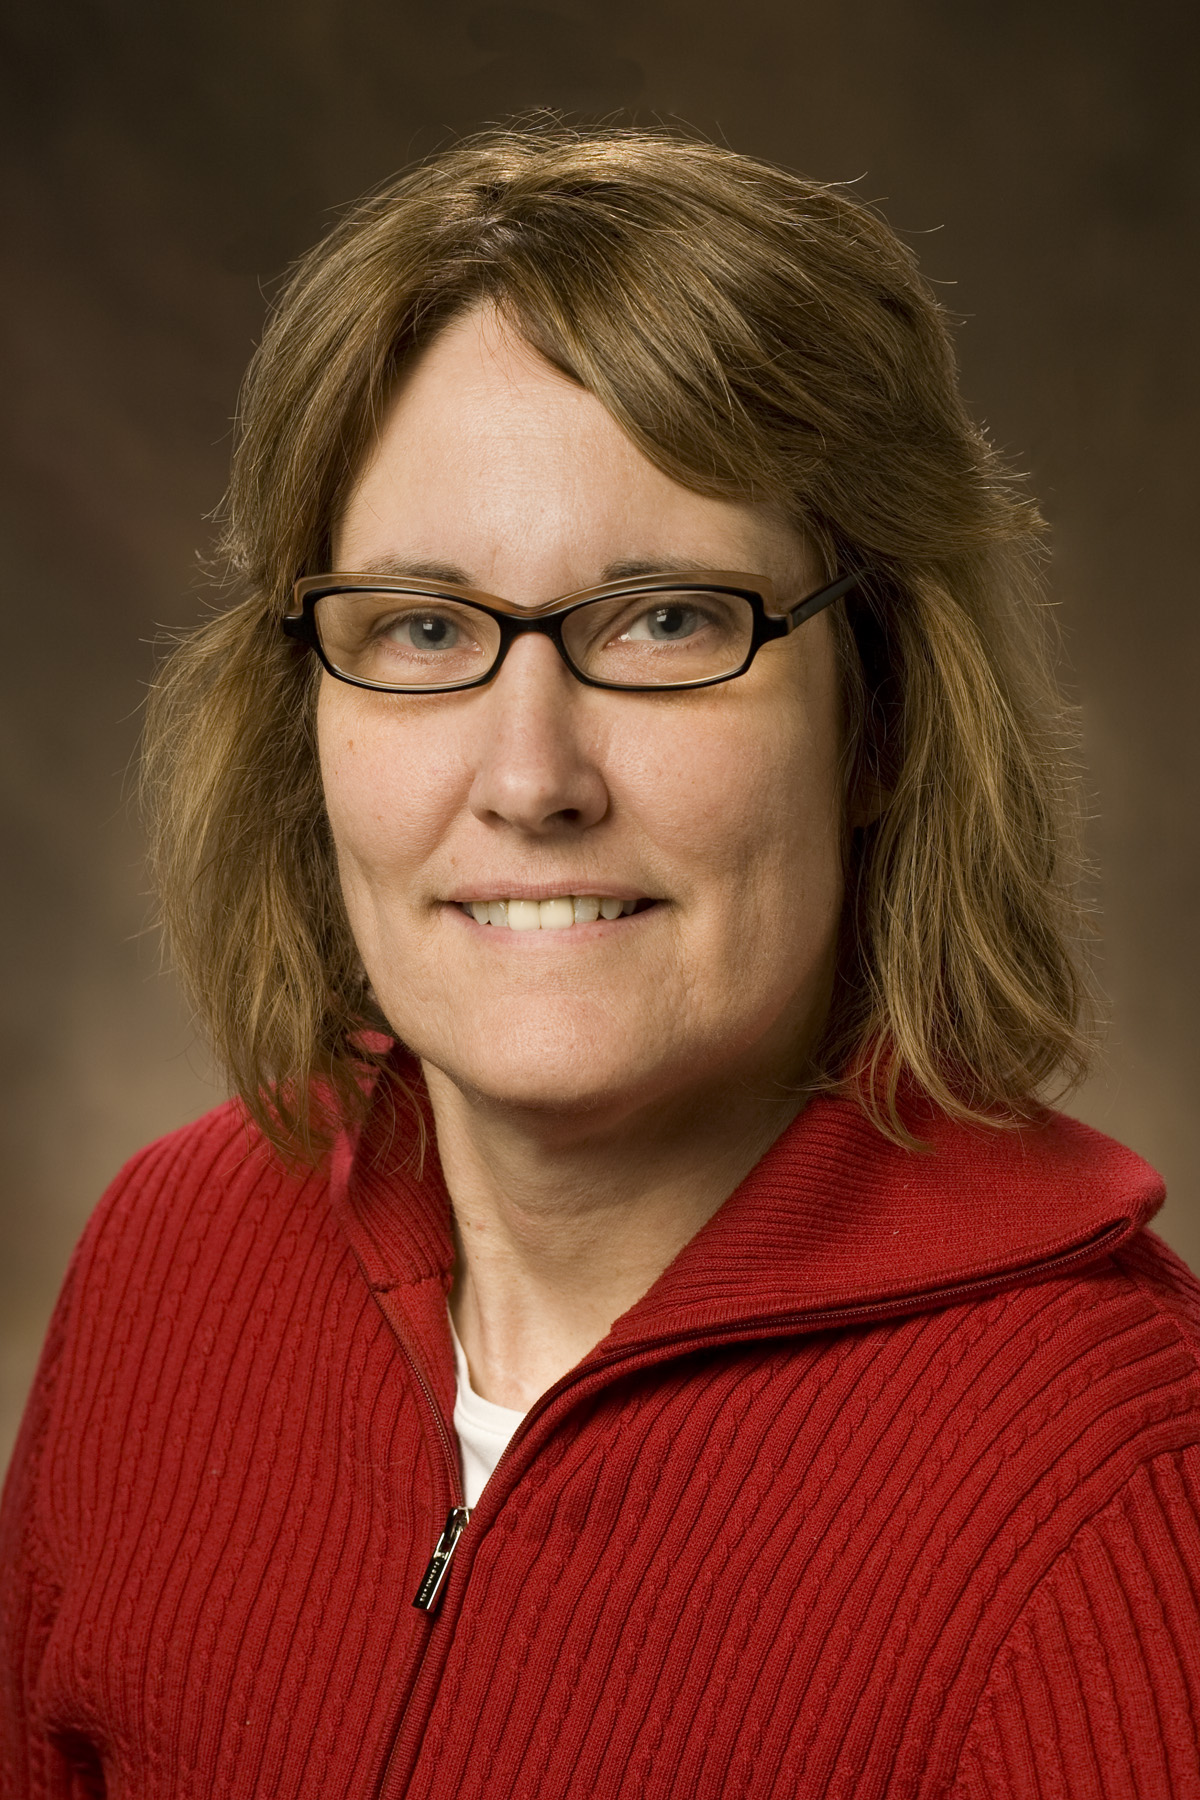 Mary McDonald came to Tech in fall 2013 to head the new initiative in sports, society, and technology in the School of History, Technology, and Society.